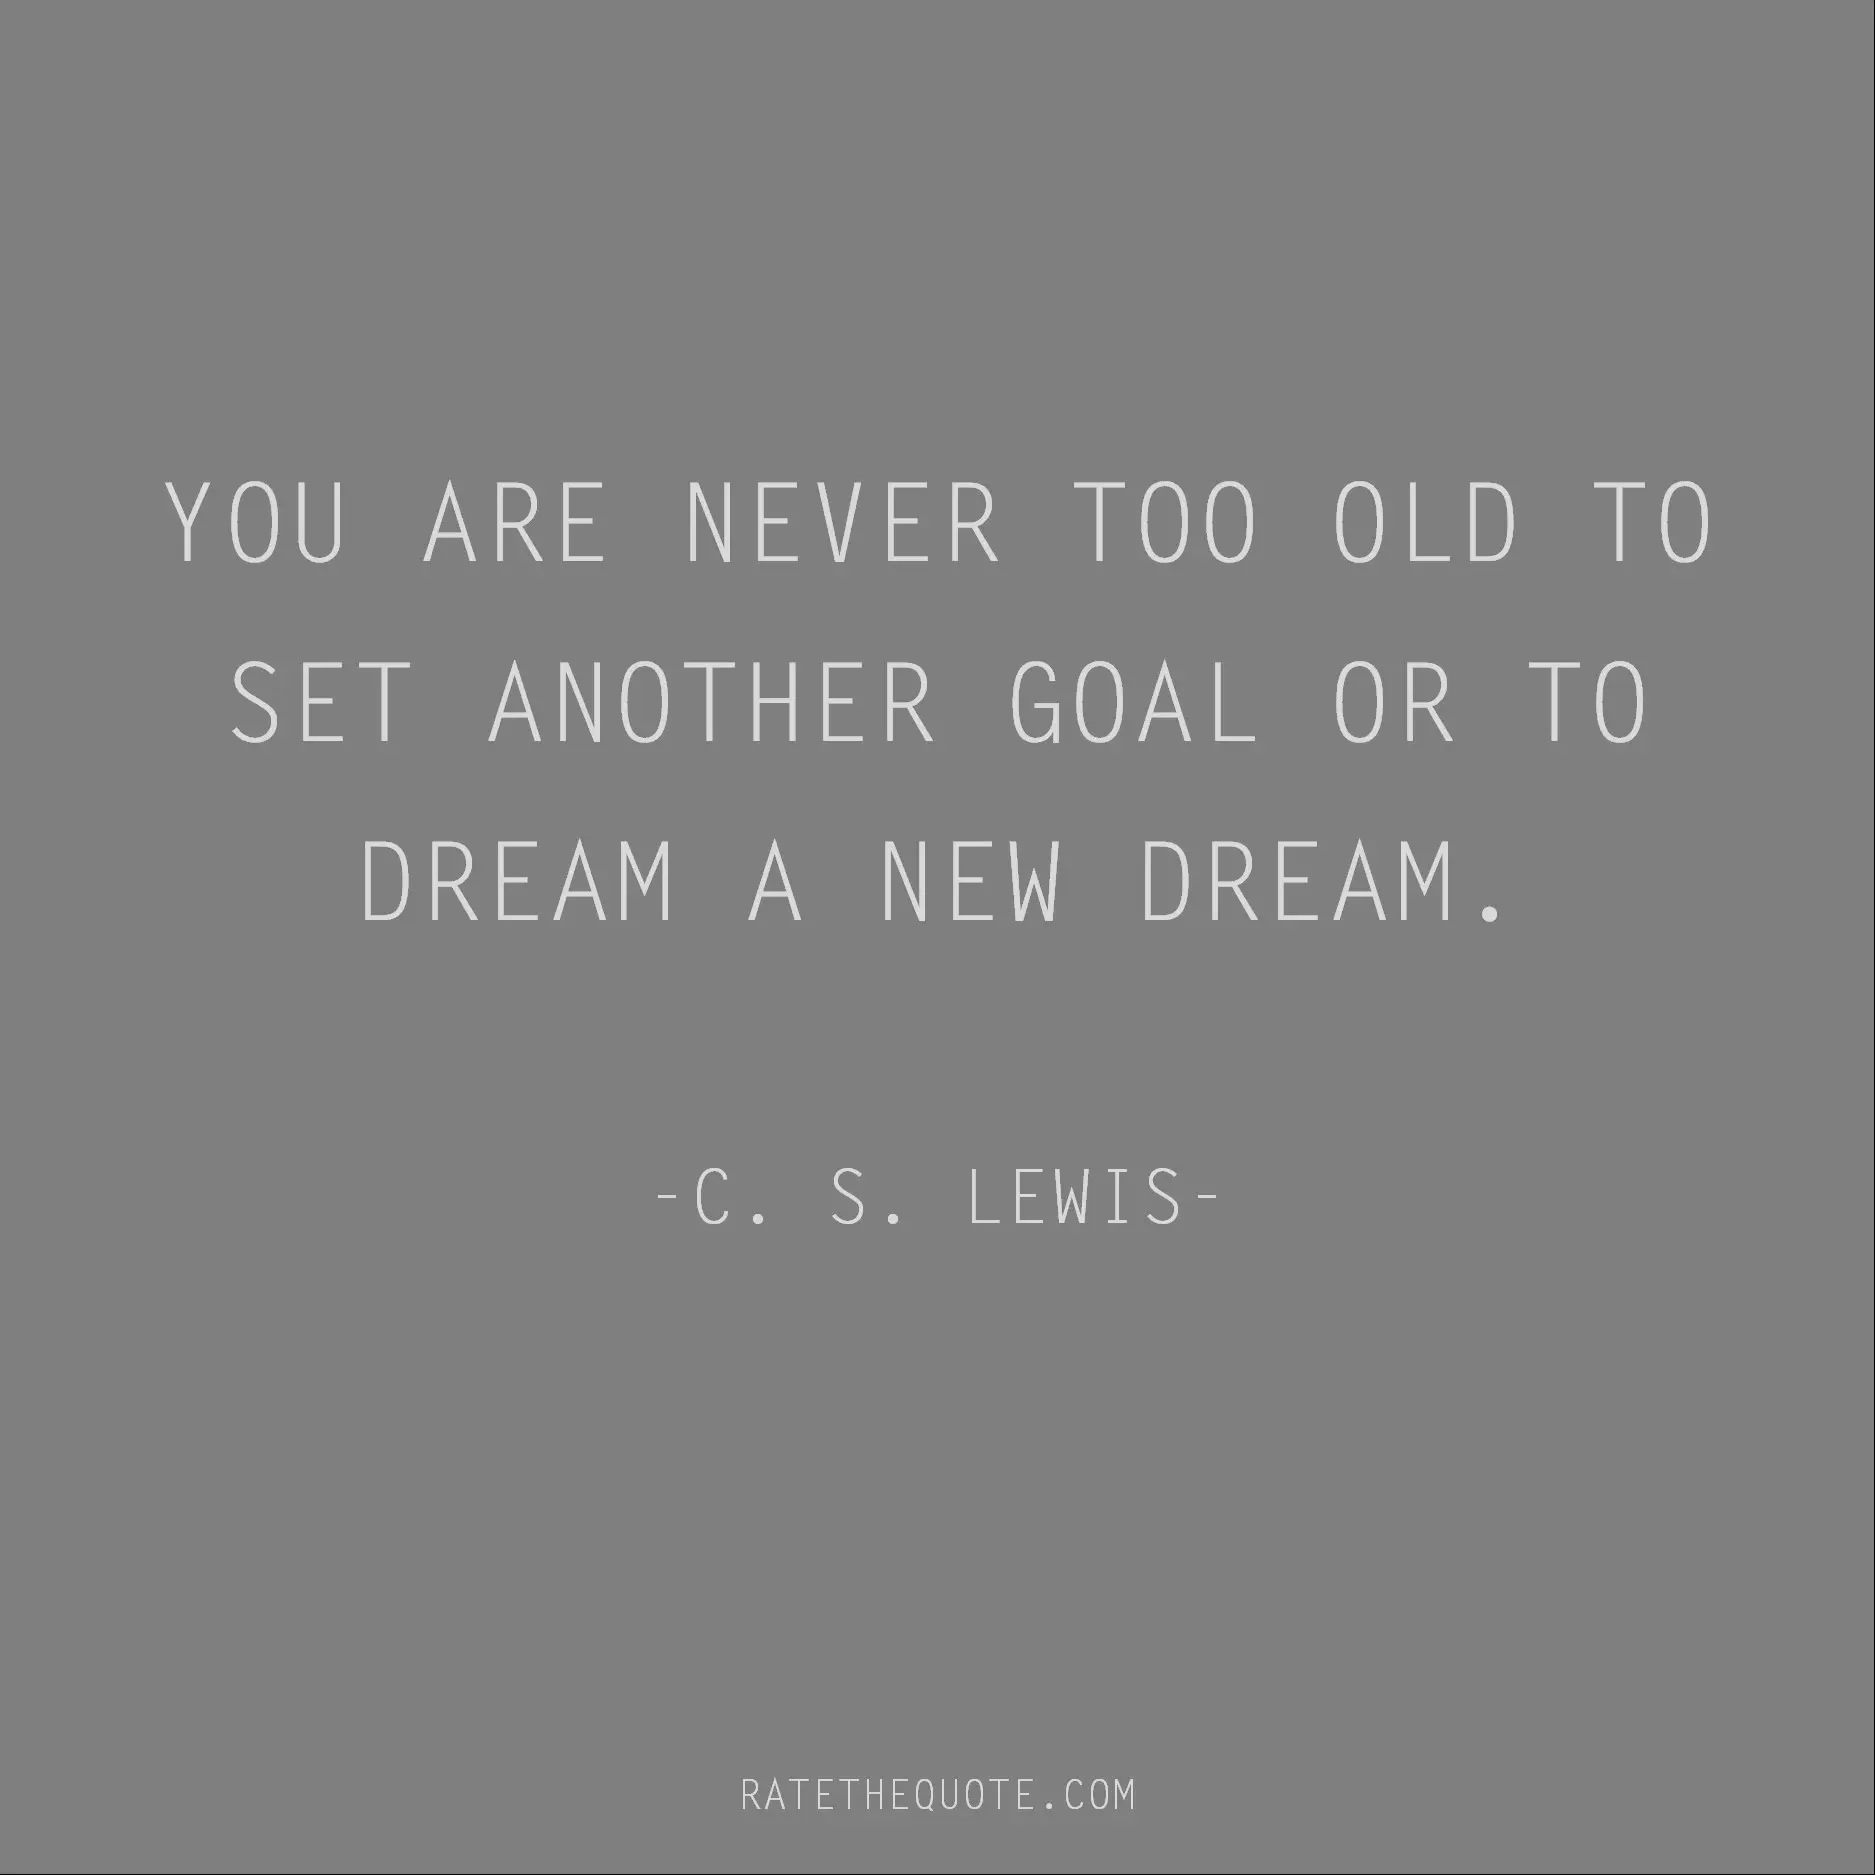 Motivational Quotes YOU ARE NEVER TOO OLD TO SET ANOTHER GOAL OR TO DREAM A NEW DREAM. -C. S. LEWIS-